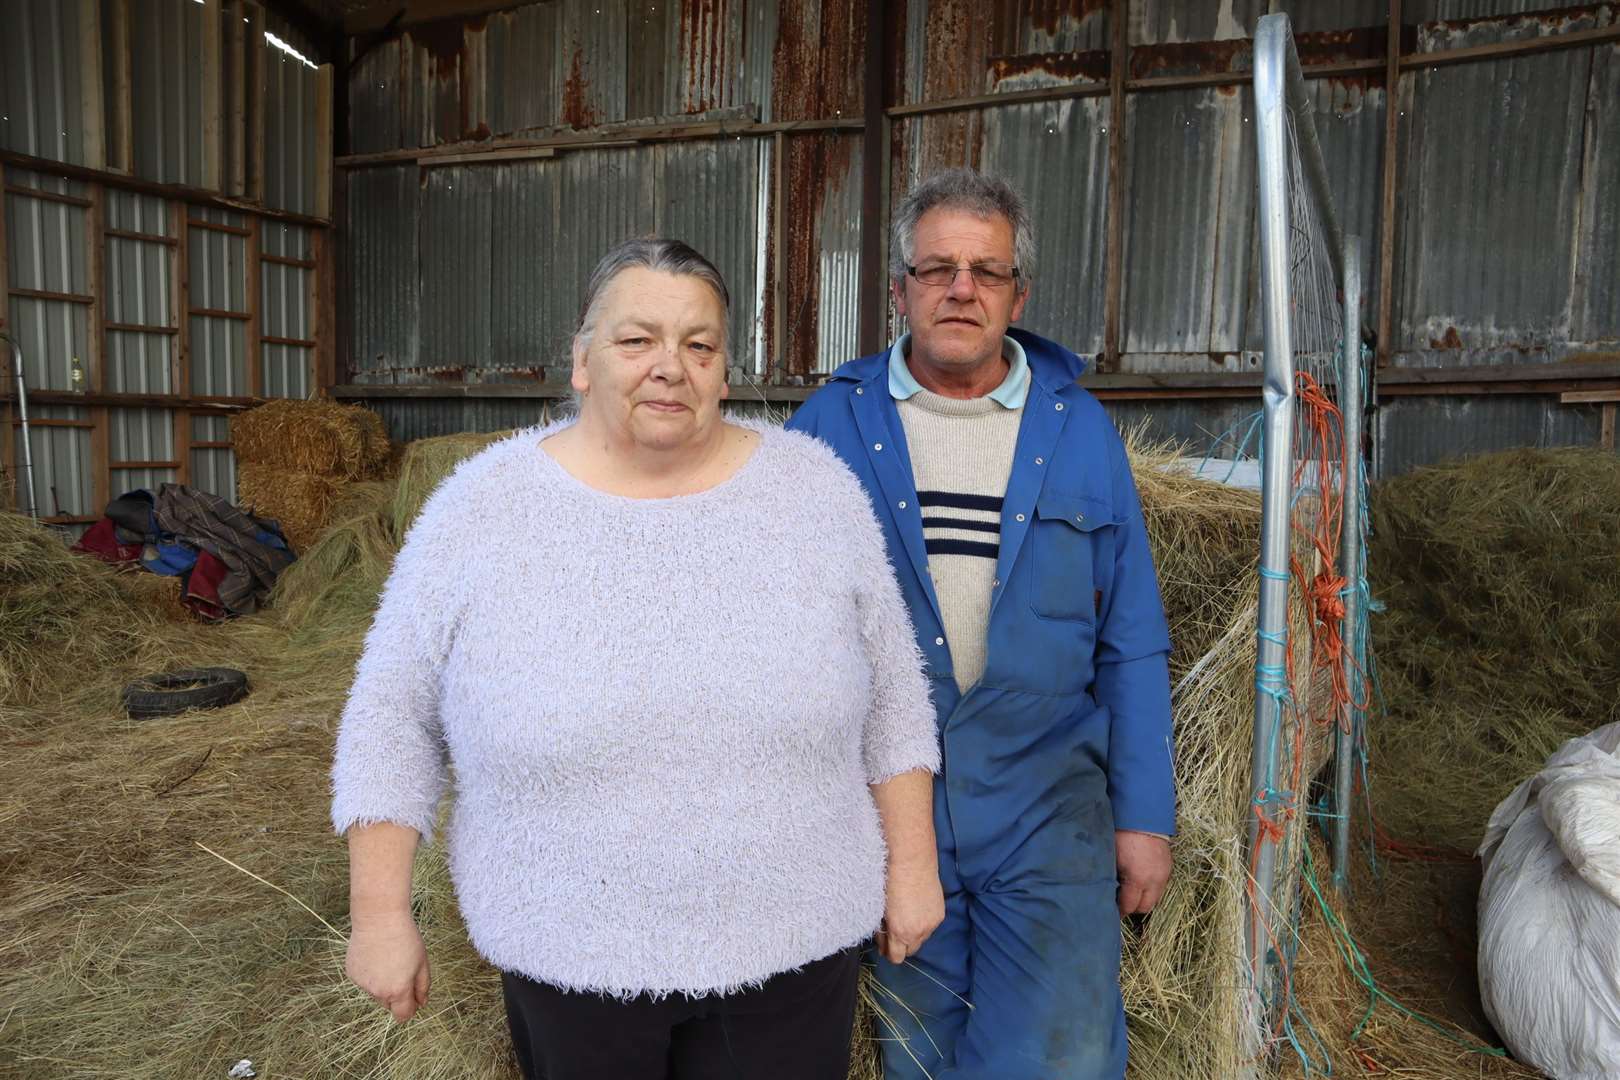 Karen and David Mosdell, of Danley Marshes Farm, on the Isle of Sheppey